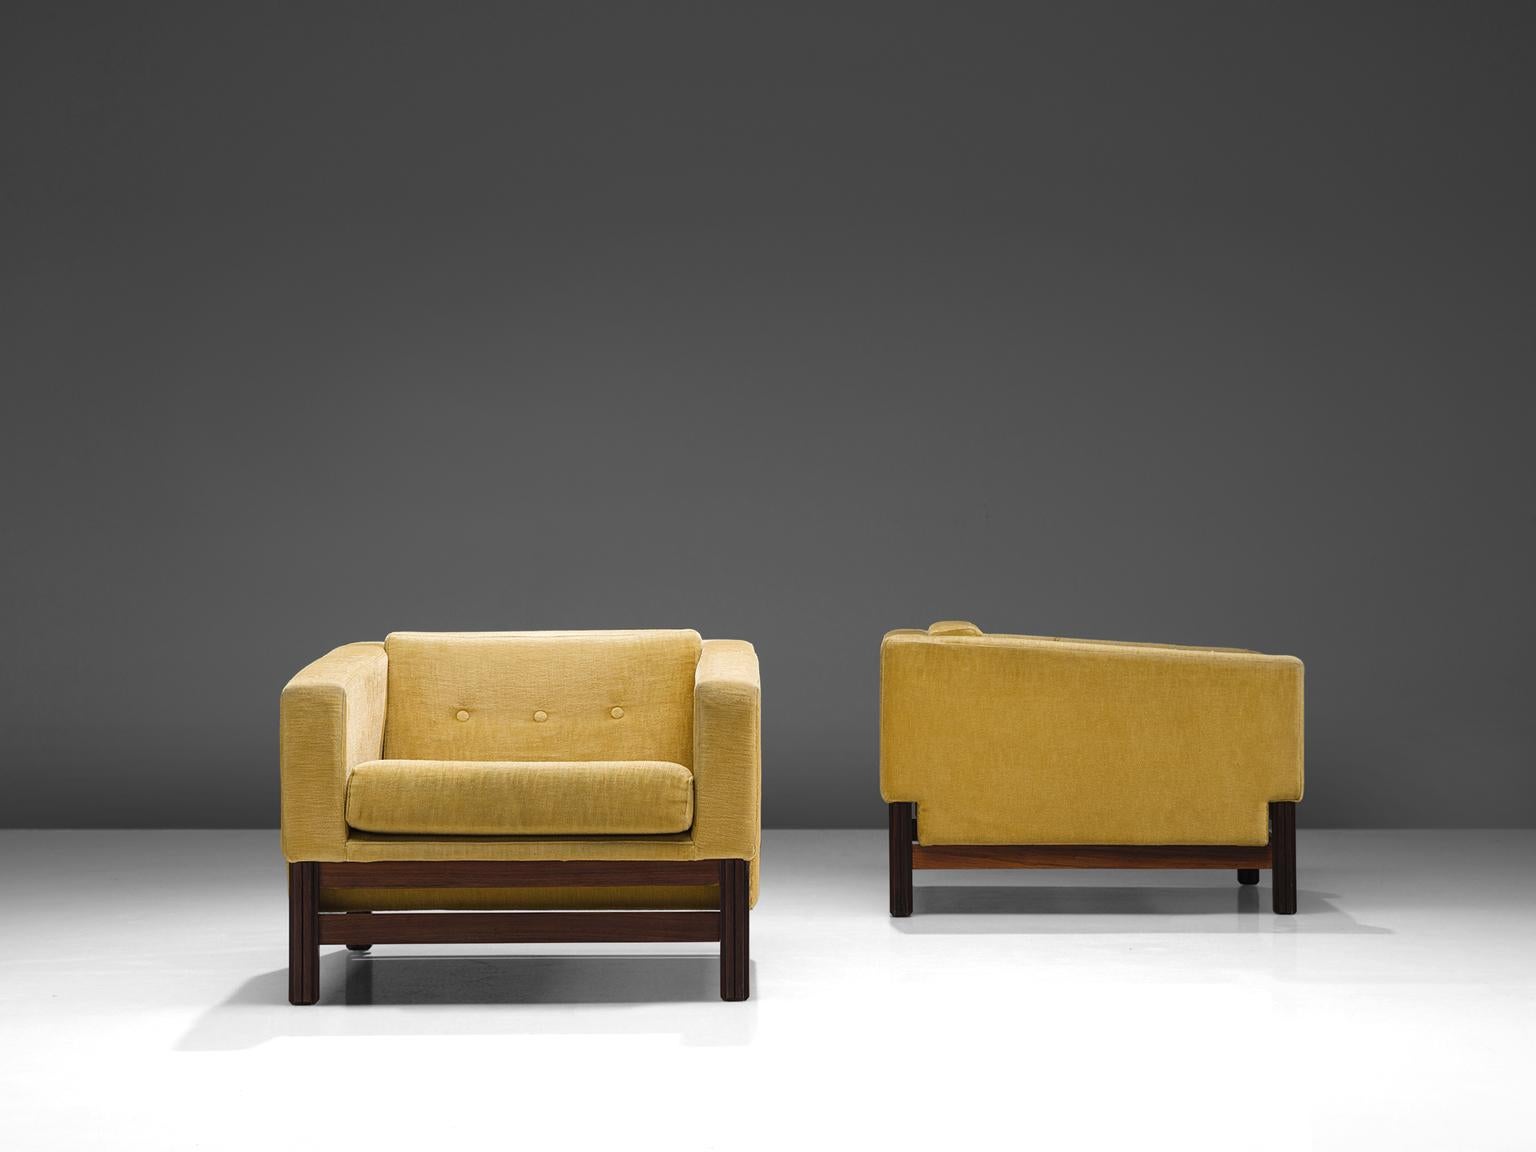 Saporiti, set of two club chairs in rosewood and yellow velvet fabric, Italy, 1960s.

These chairs, equipped with a rosewood frame still hold their original yellow upholstery. This chairs are designed in a modest, yet distinguished look. The